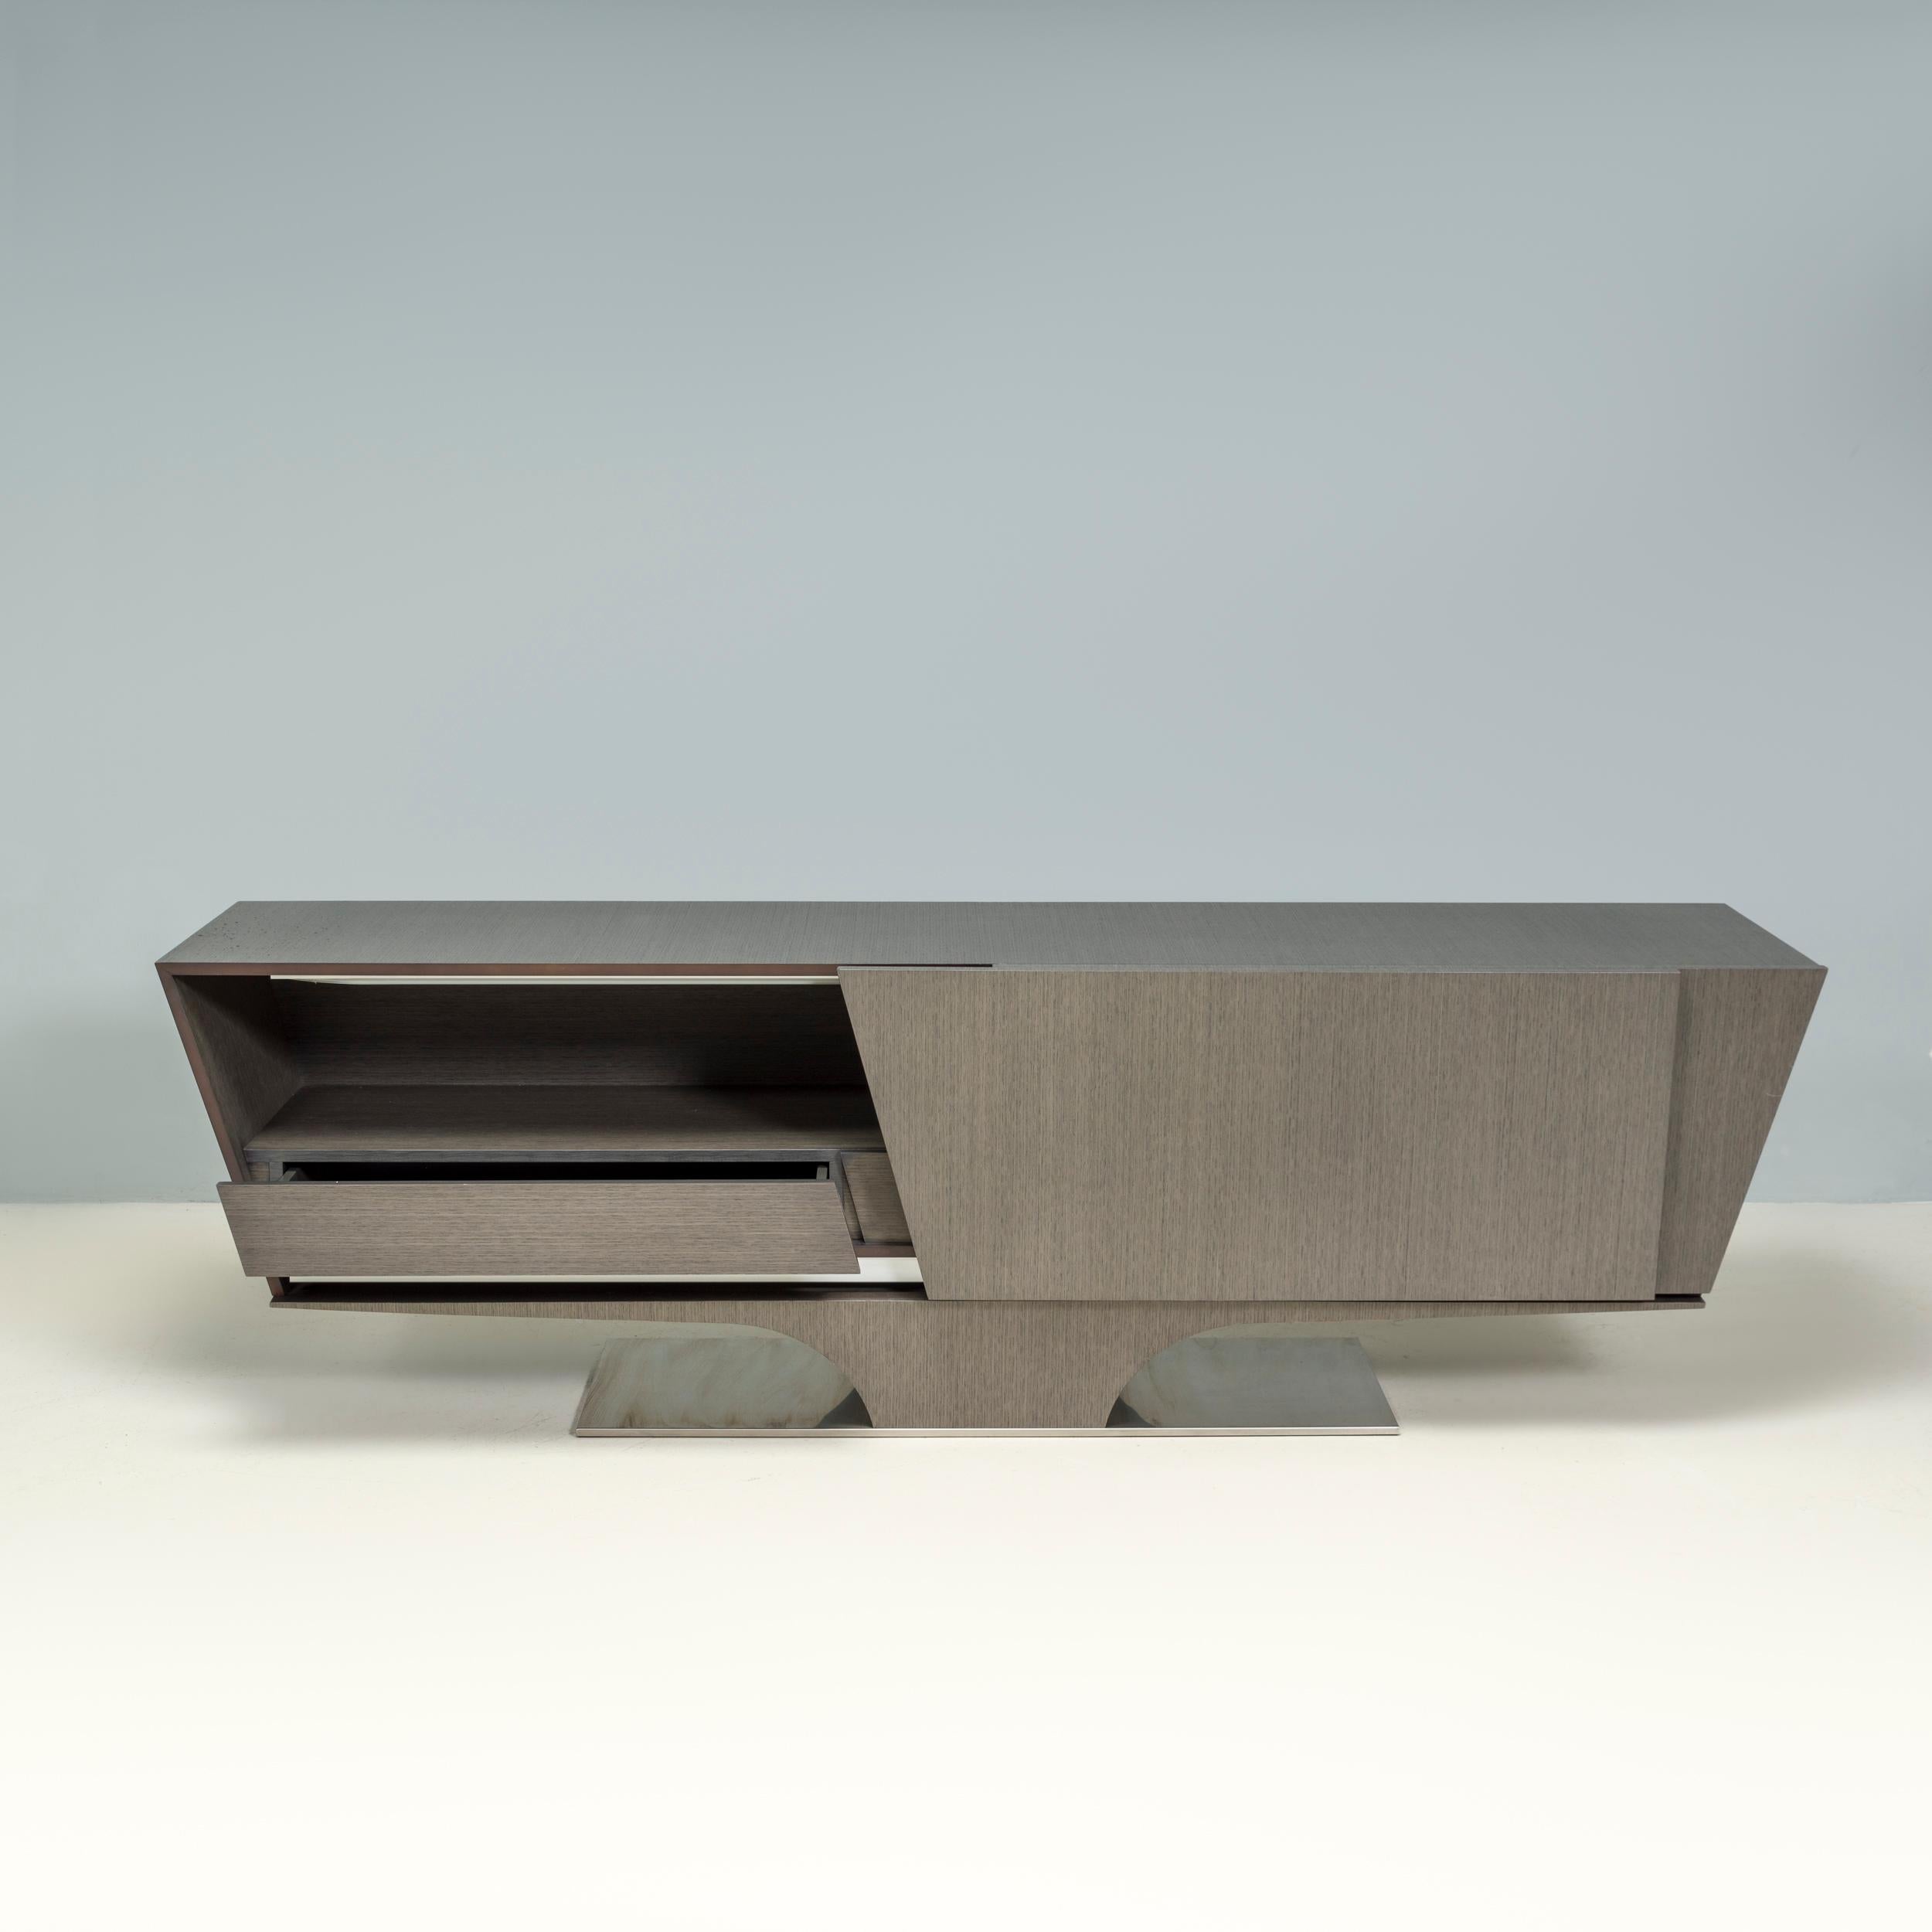 Originally designed in 2006 by Daniel Rhode for Roche Bobois, the Vertigo collection has a sleek, modern aesthetic.

The buffet is constructed from a wood laminate with an angled silhouette, which allows for a generous sideboard area and tapering